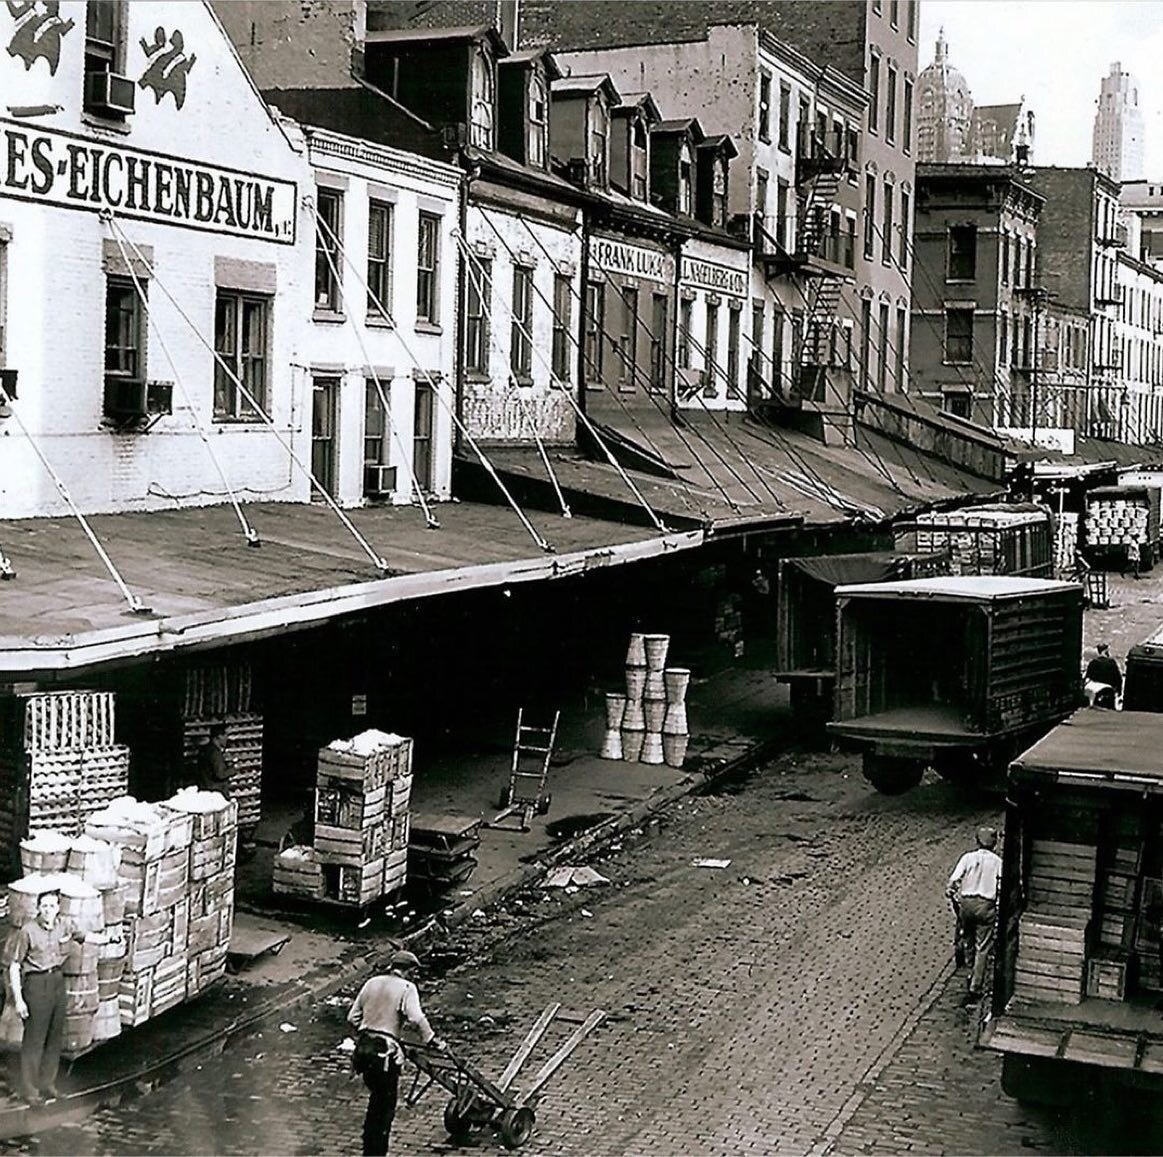 This week, the Market was designated as a Historic Business. Take a trip down memory lane with these old photos of the Market. #ThrowbackThursday

@huntspointmkt